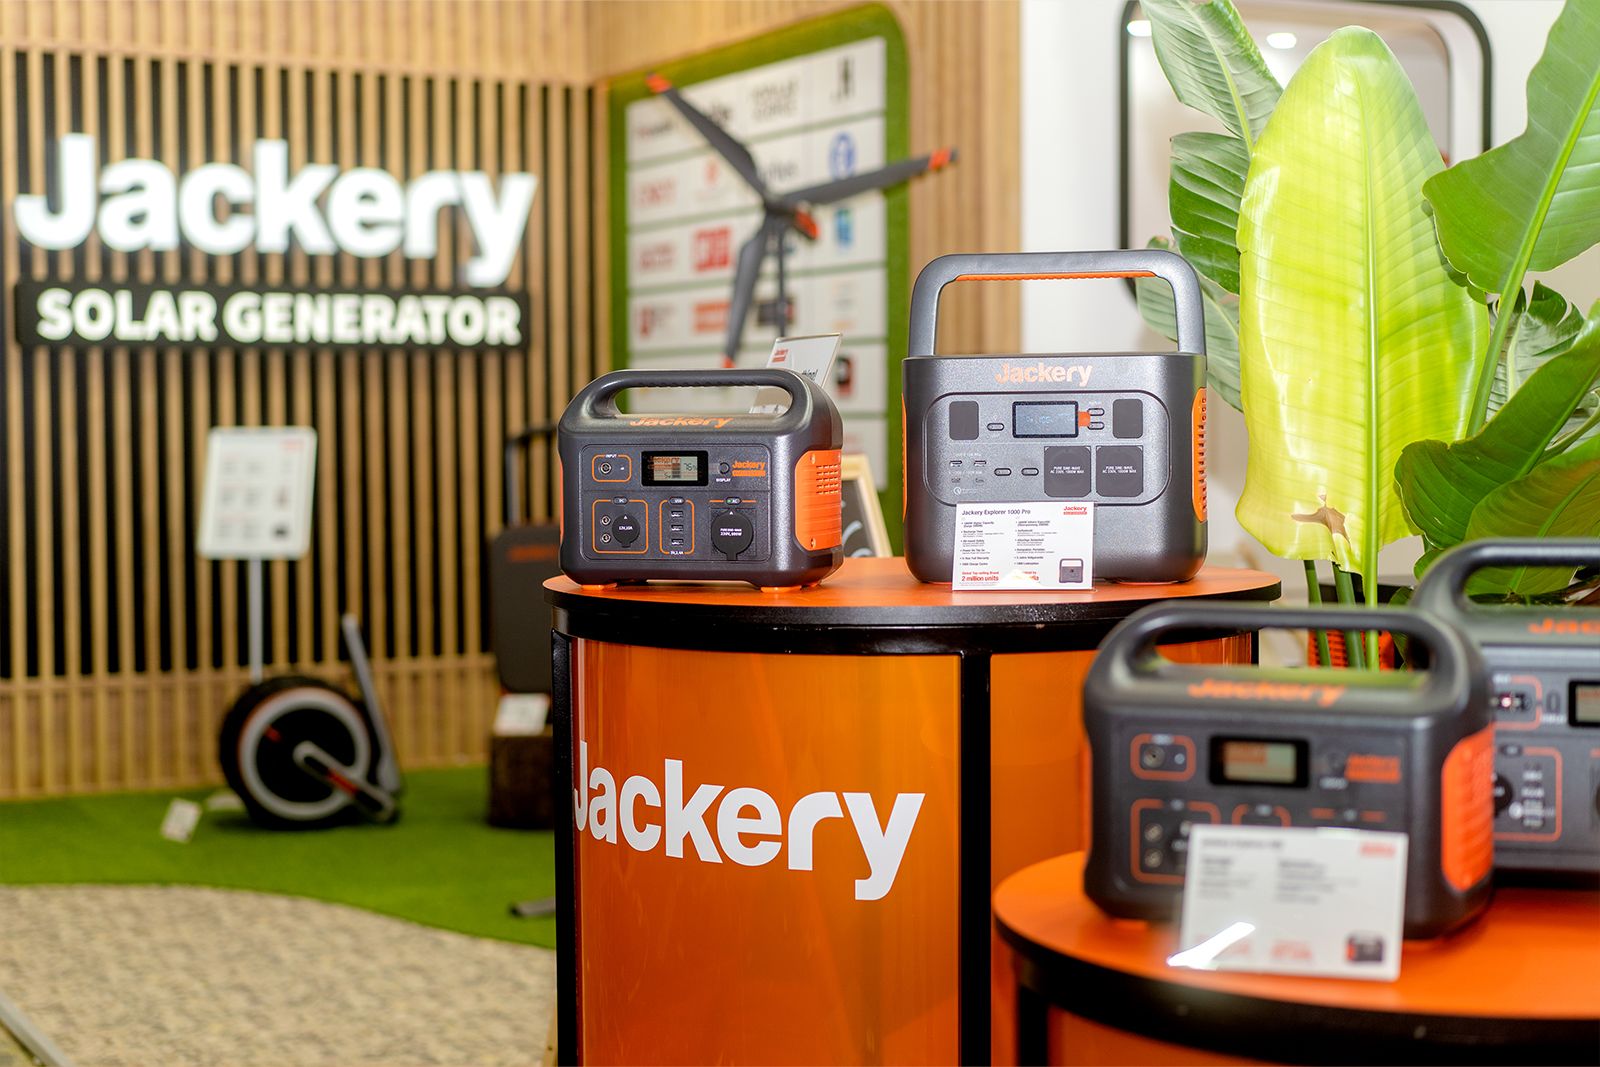 The speed of sunlight: New Jackery Solar Generator 1000 Pro enables fast solar charging photo 1